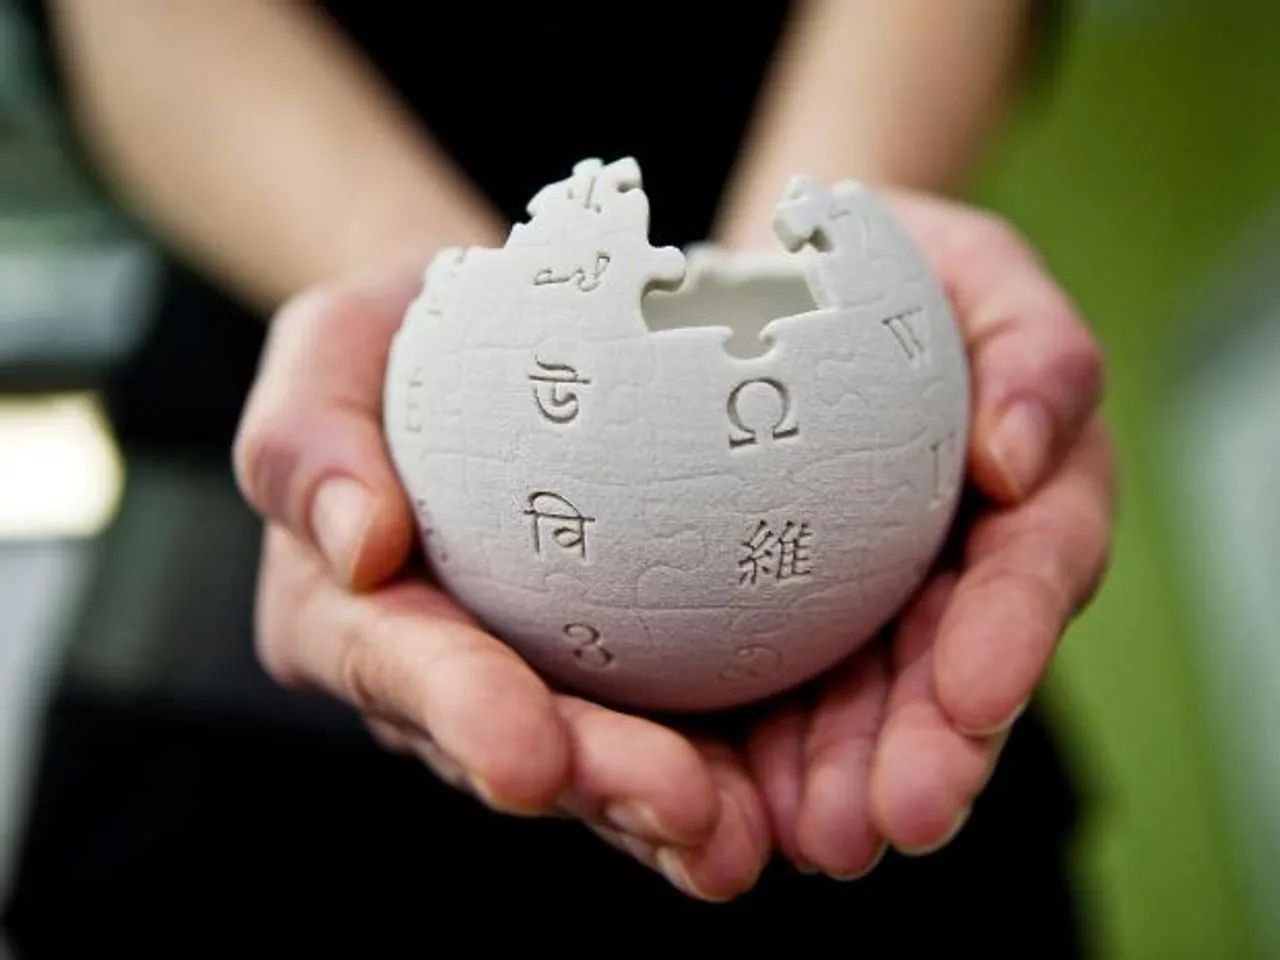 China's own Wikipedia won't be publicly-editable